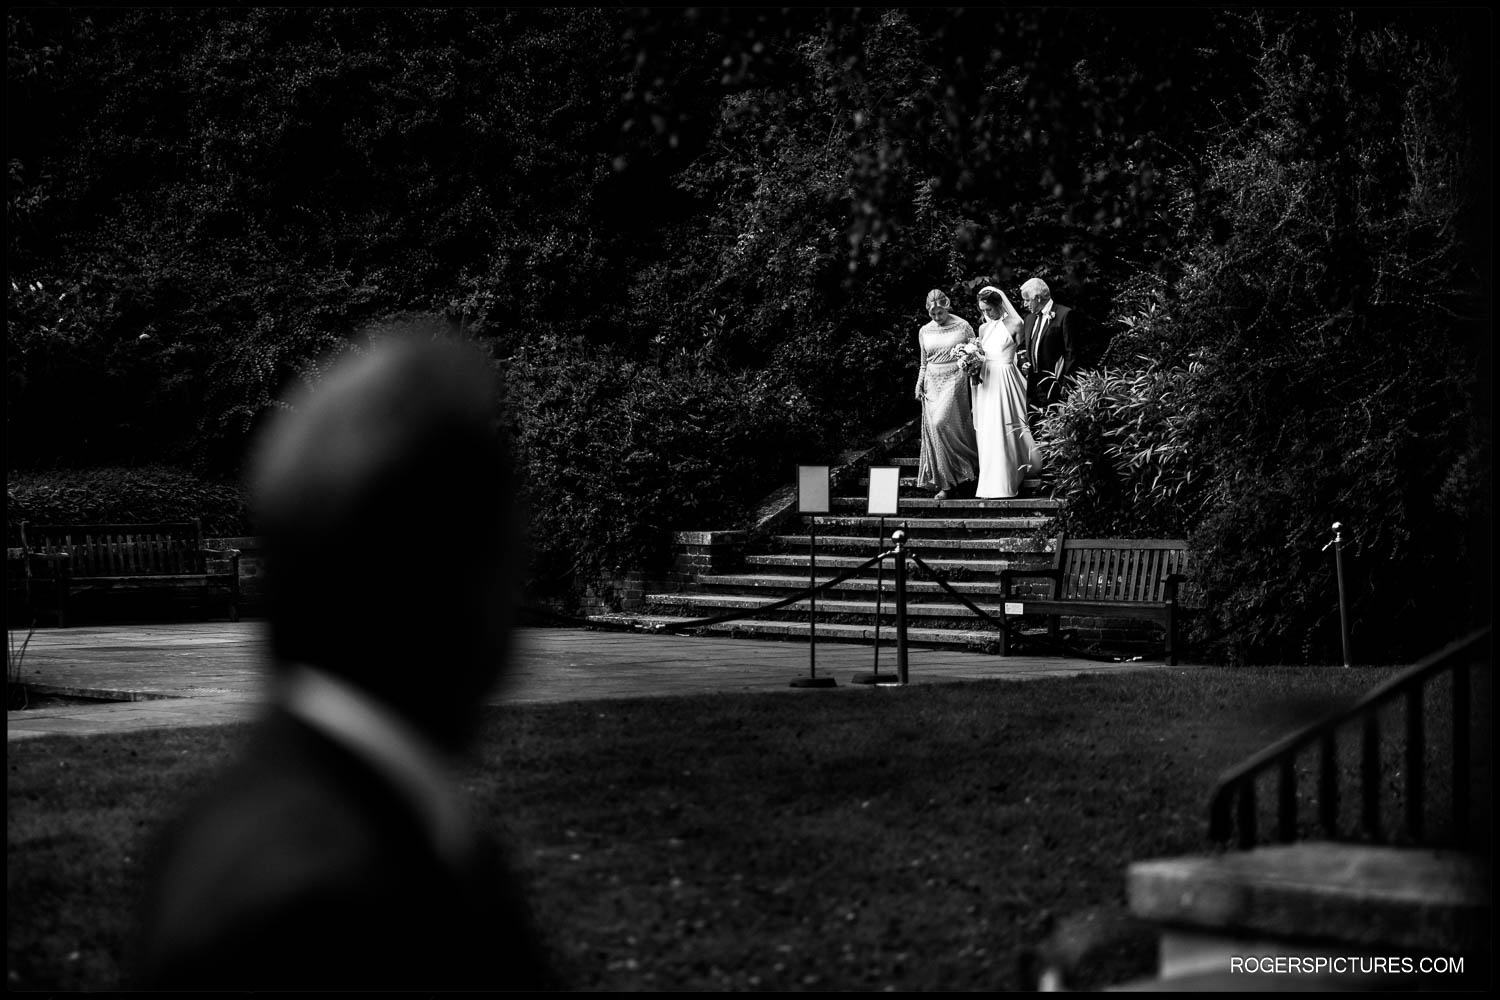 Black and white documentary wedding photo at an outdoor wedding in Hampstead